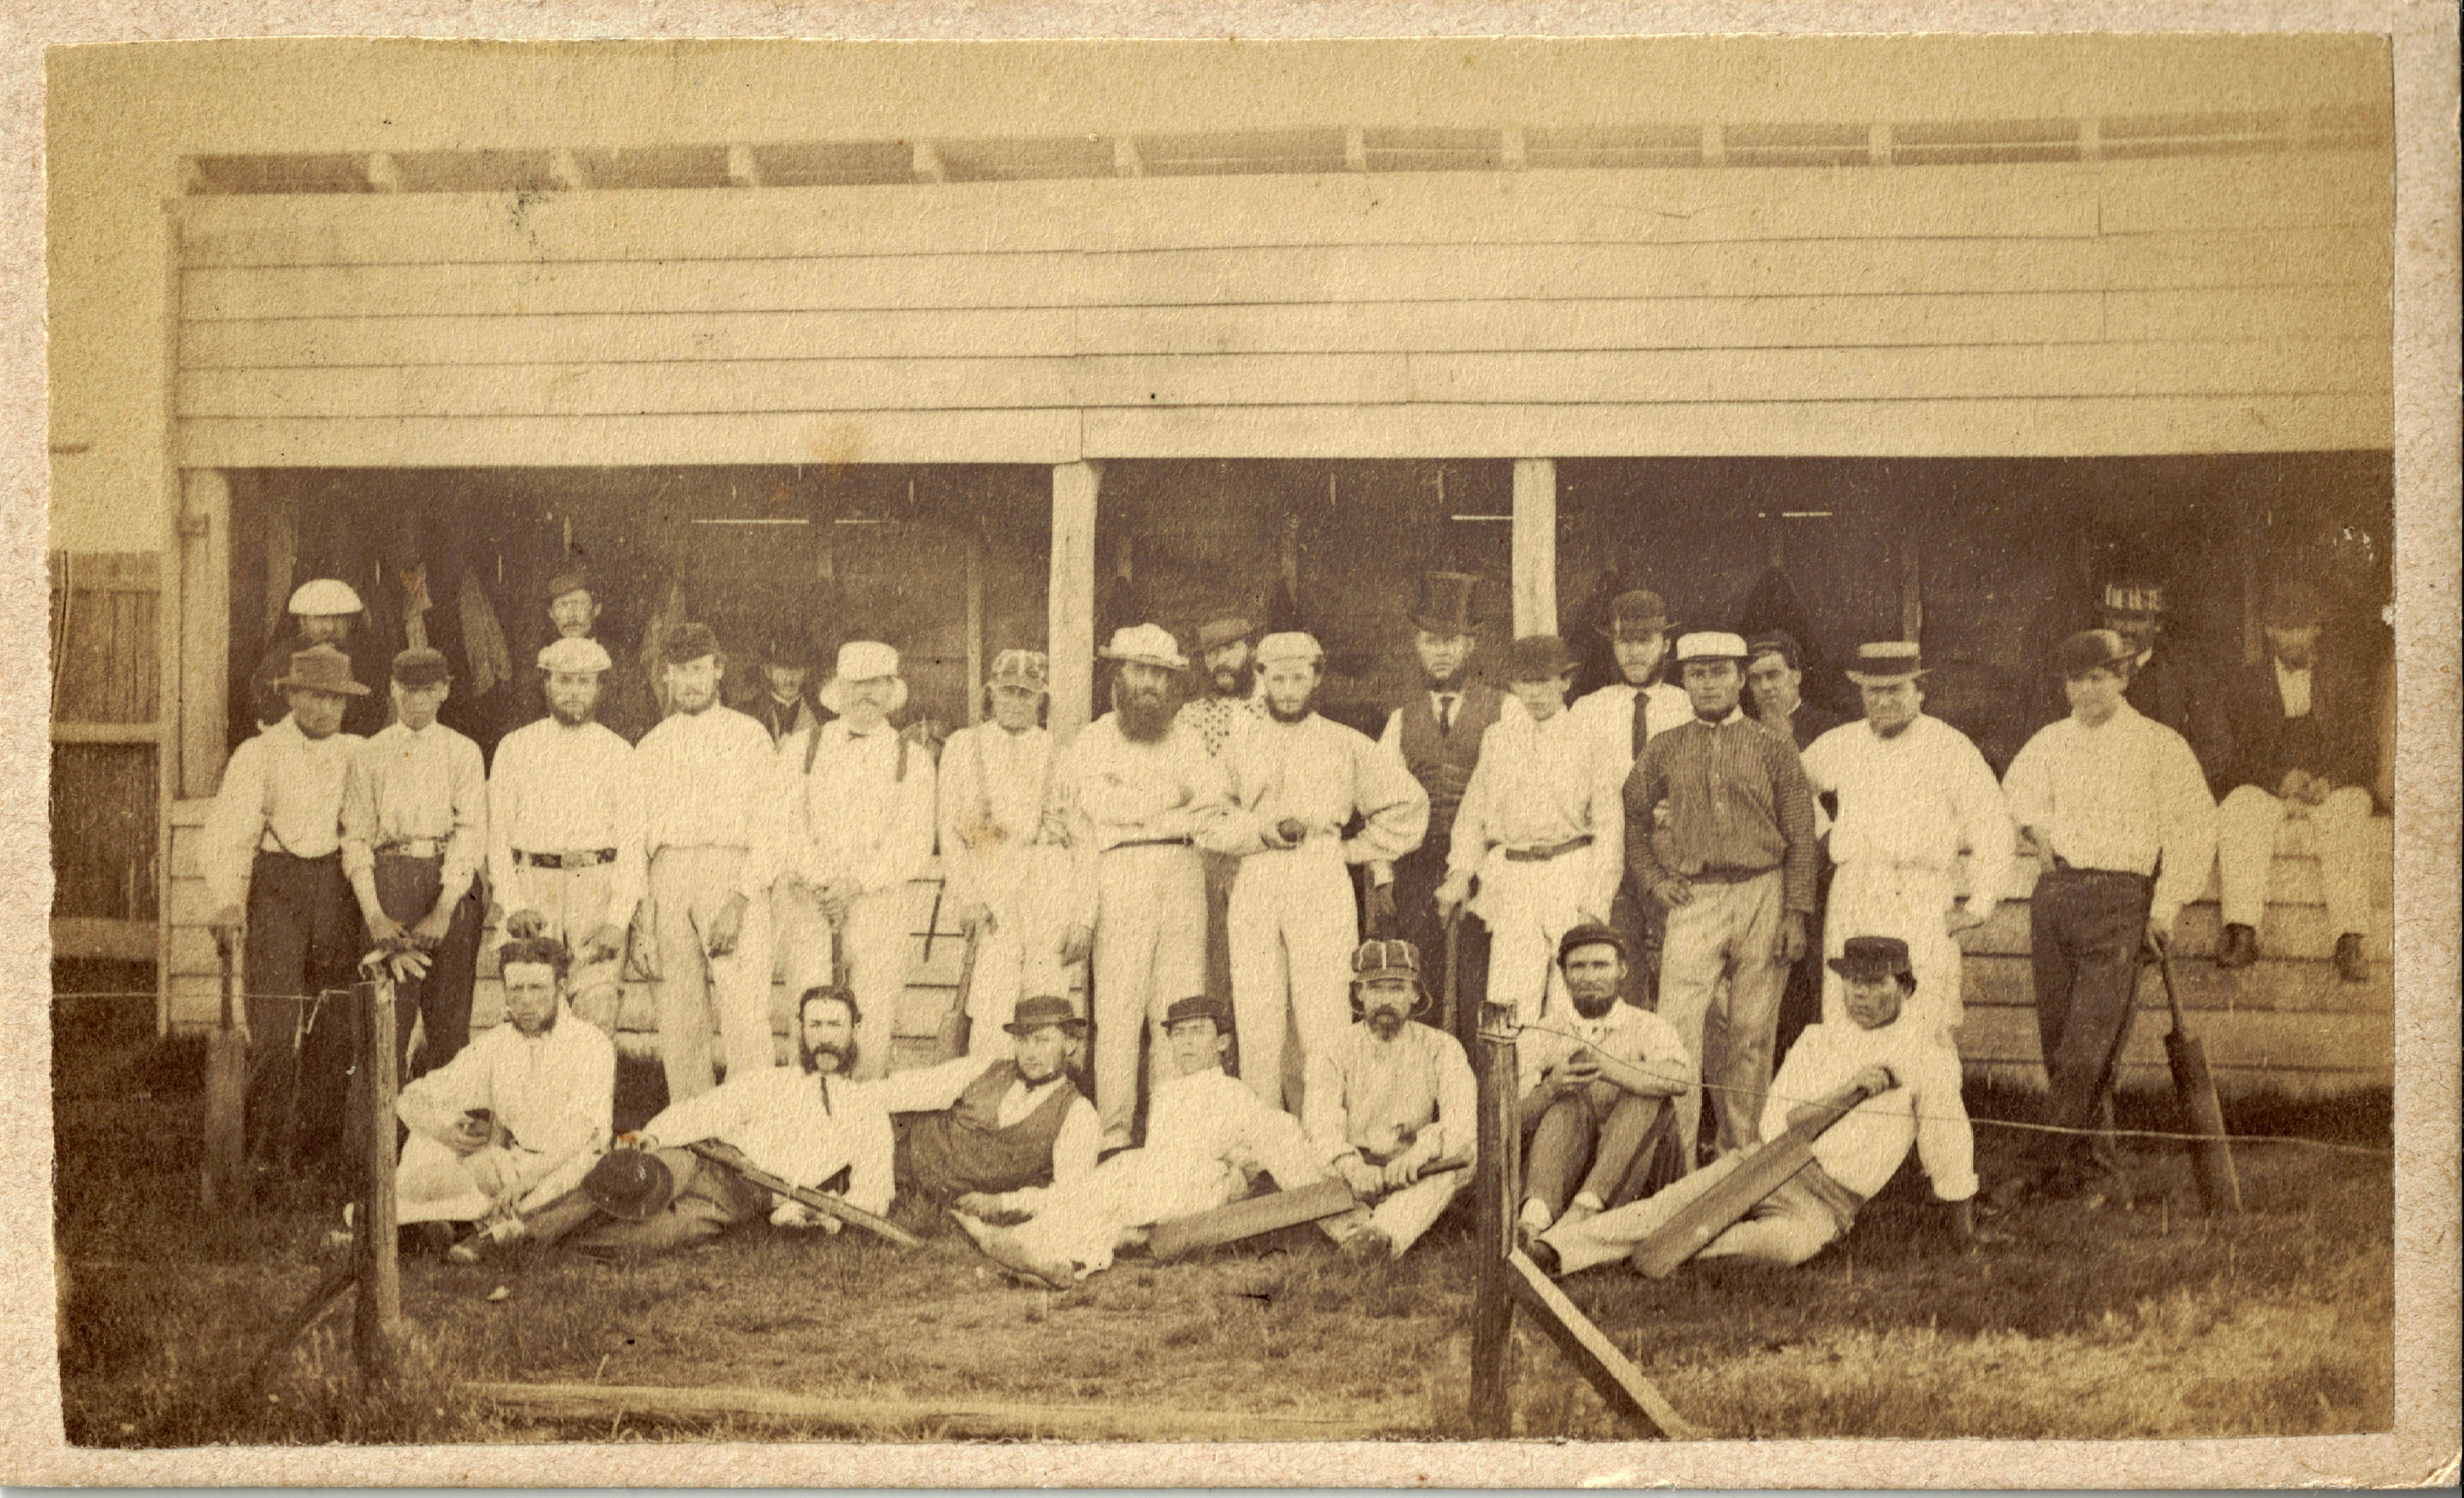 Newcastle Cricket Team, October 1870. Photo Credit: Photographed by Beaufoy Merlin. Digitised by Anne Glennie from the Glennie Family Albums)